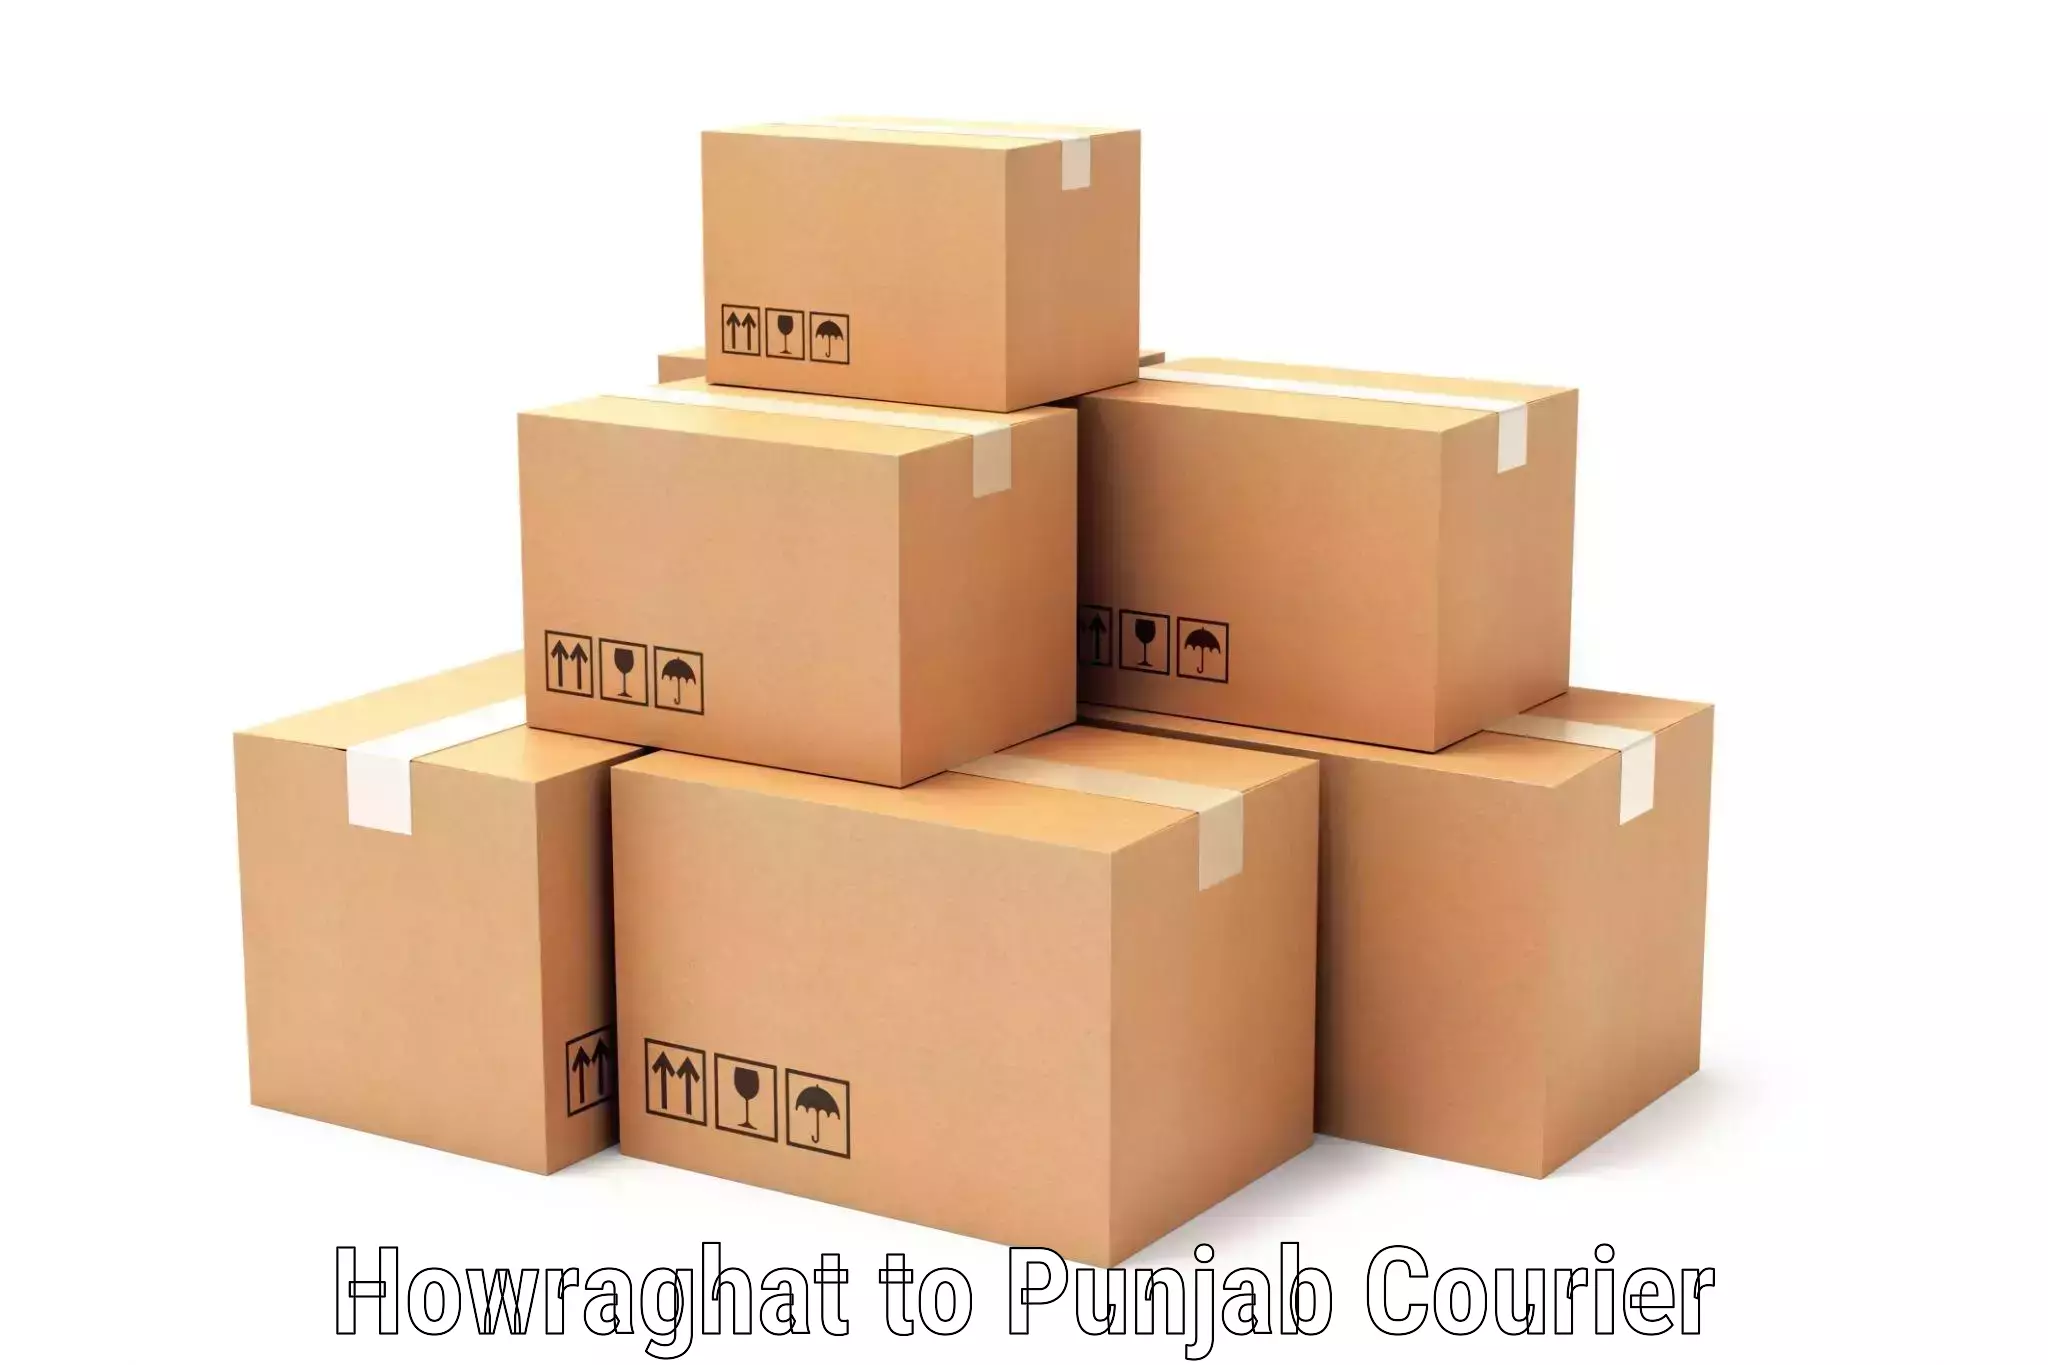 Nationwide courier service Howraghat to Nawanshahr